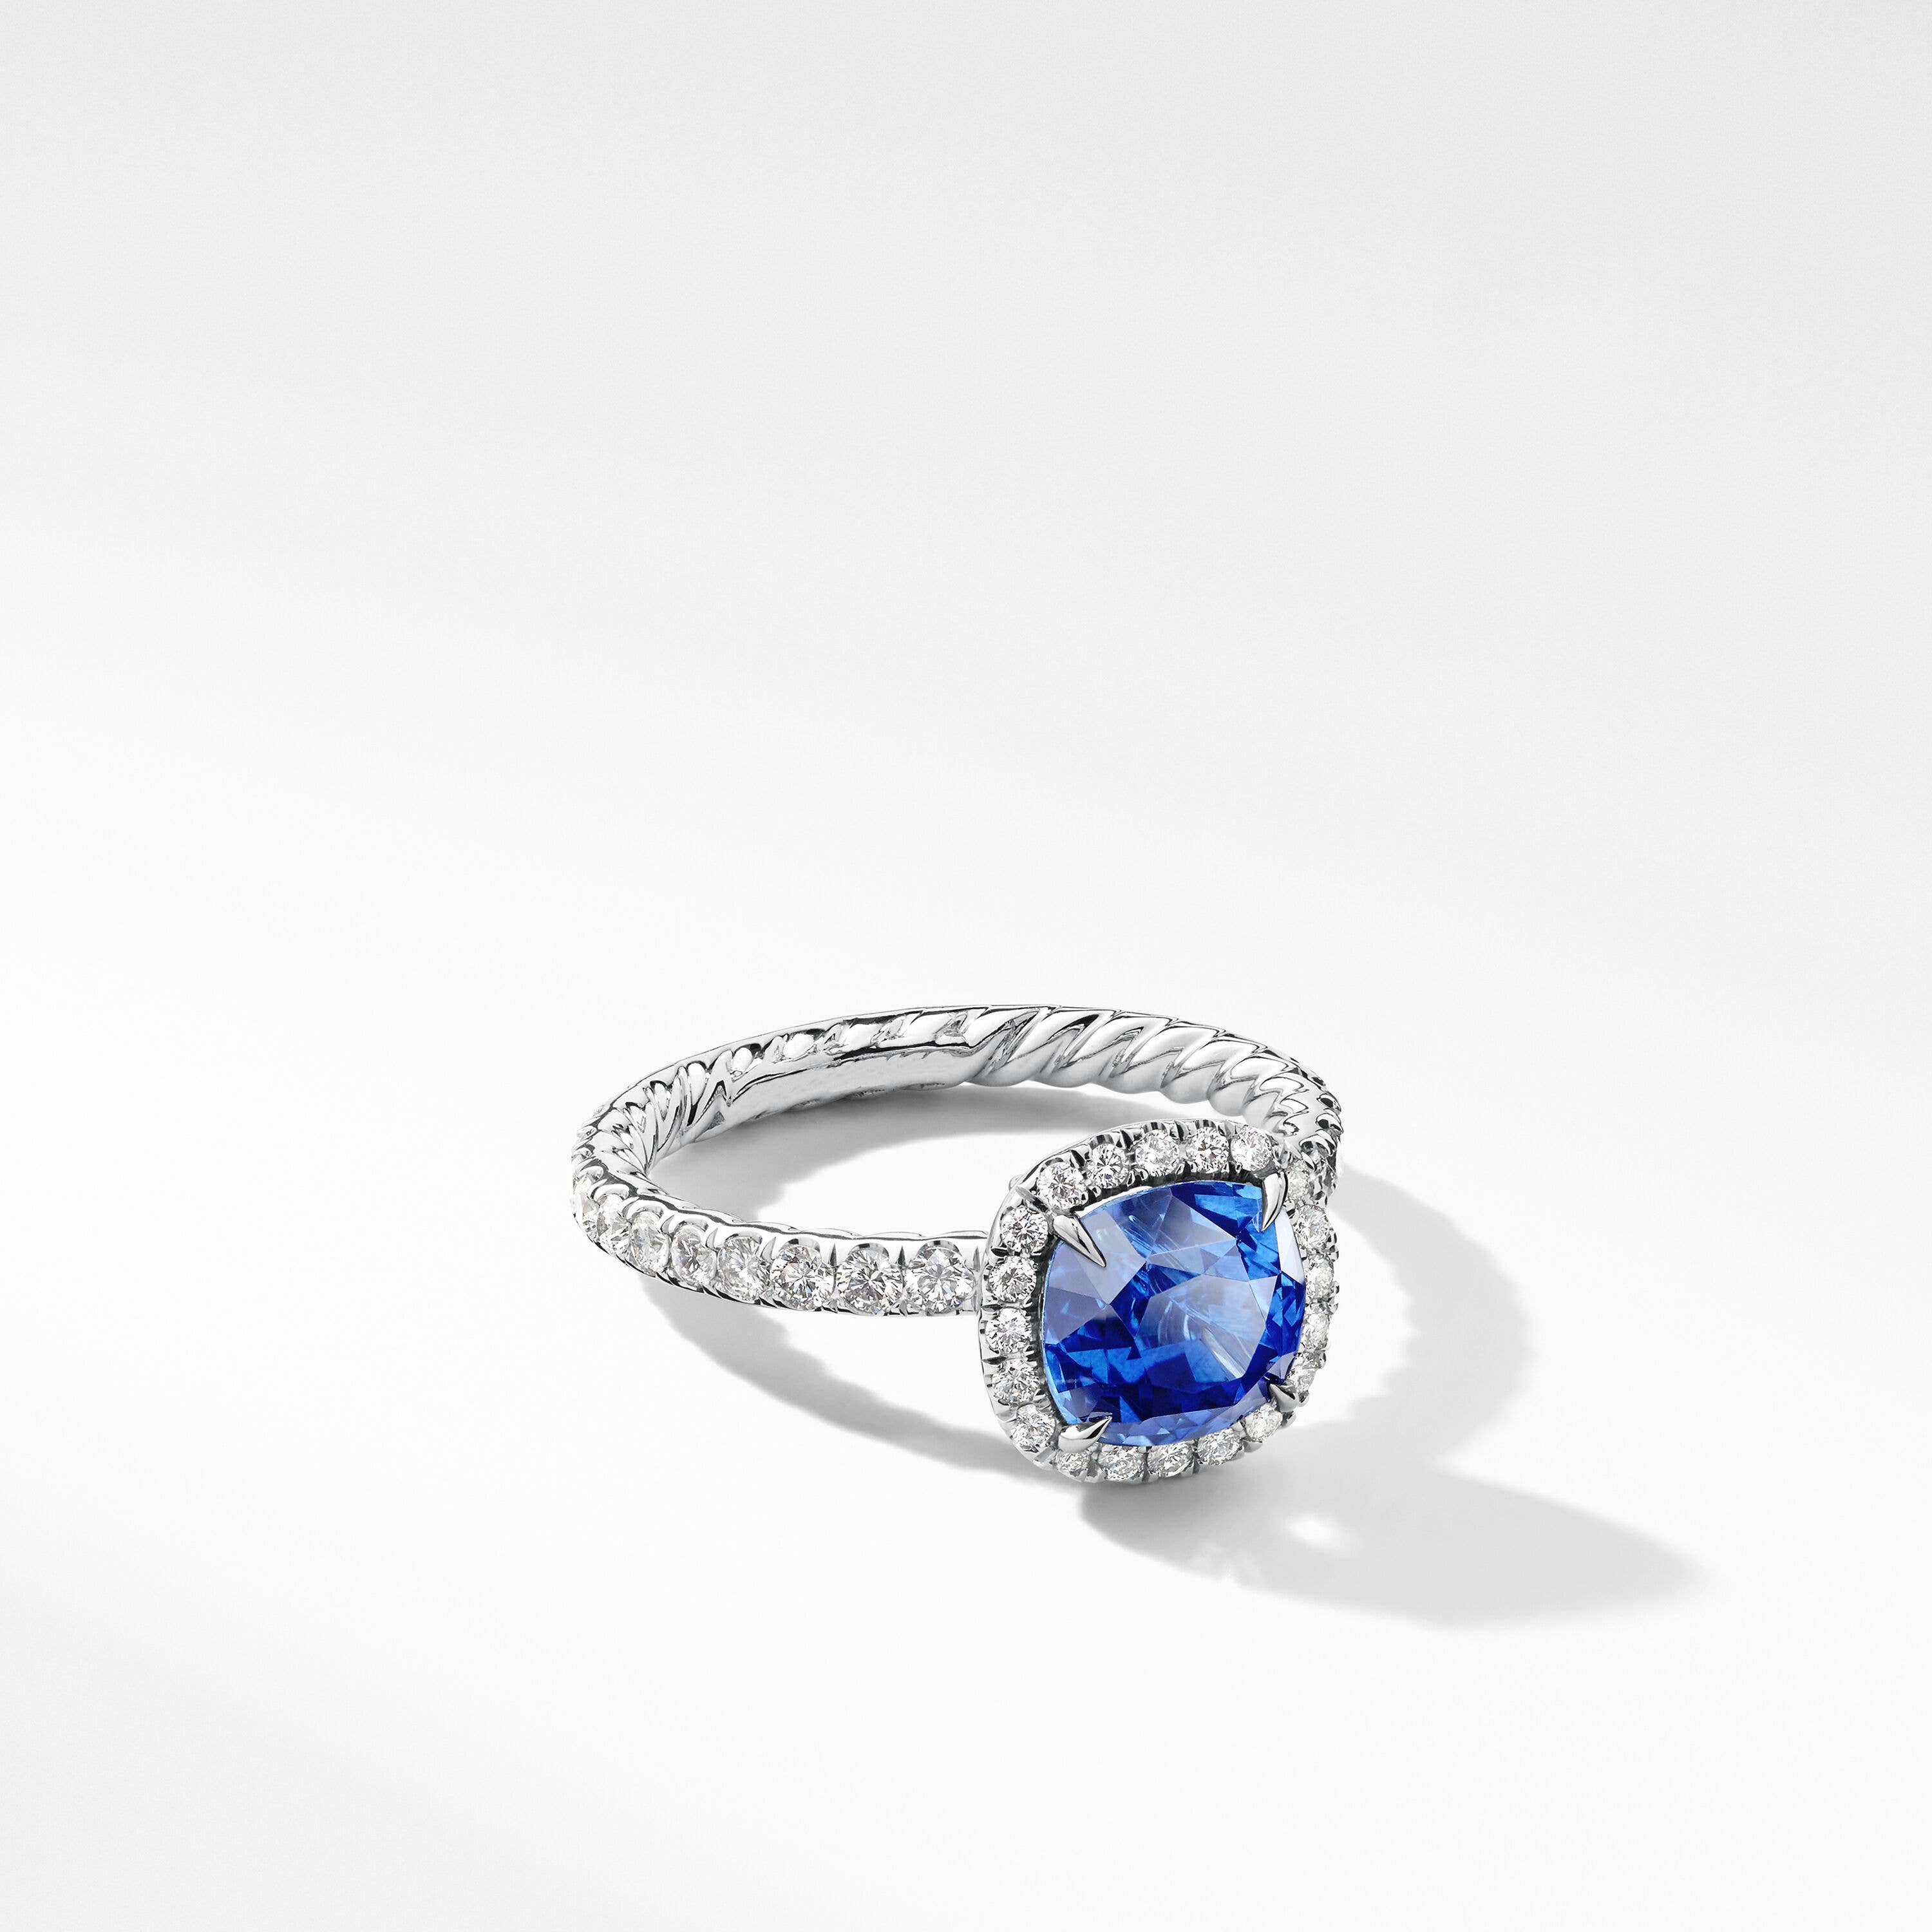 DY Capri® Engagement Ring in Platinum with Blue Sapphire, Cushion